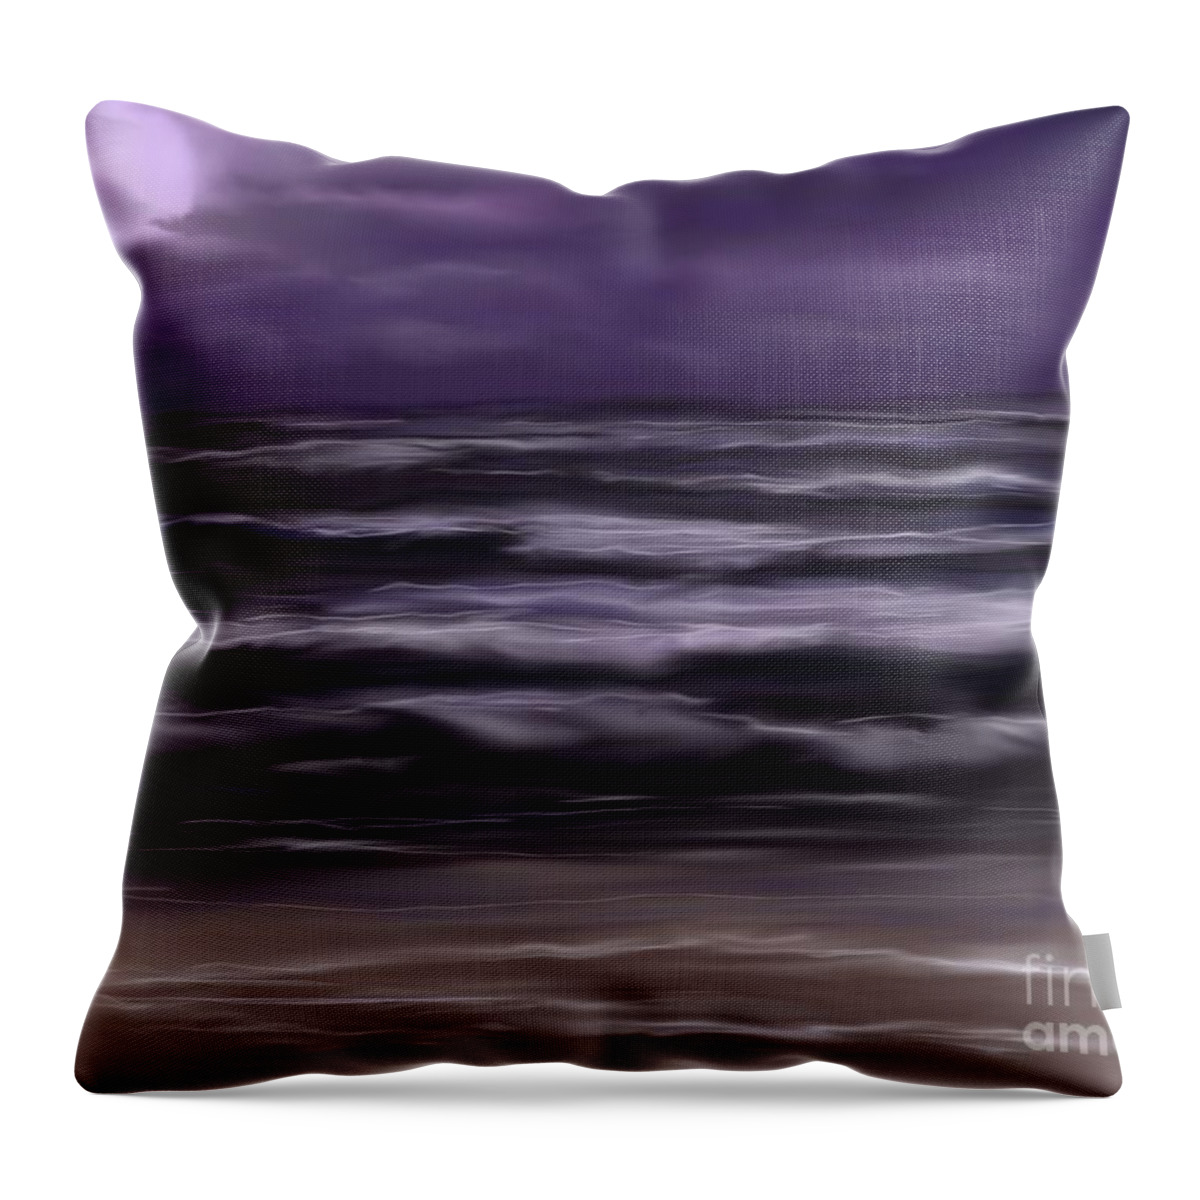 Night Throw Pillow featuring the painting Ocean Night by Roxy Riou